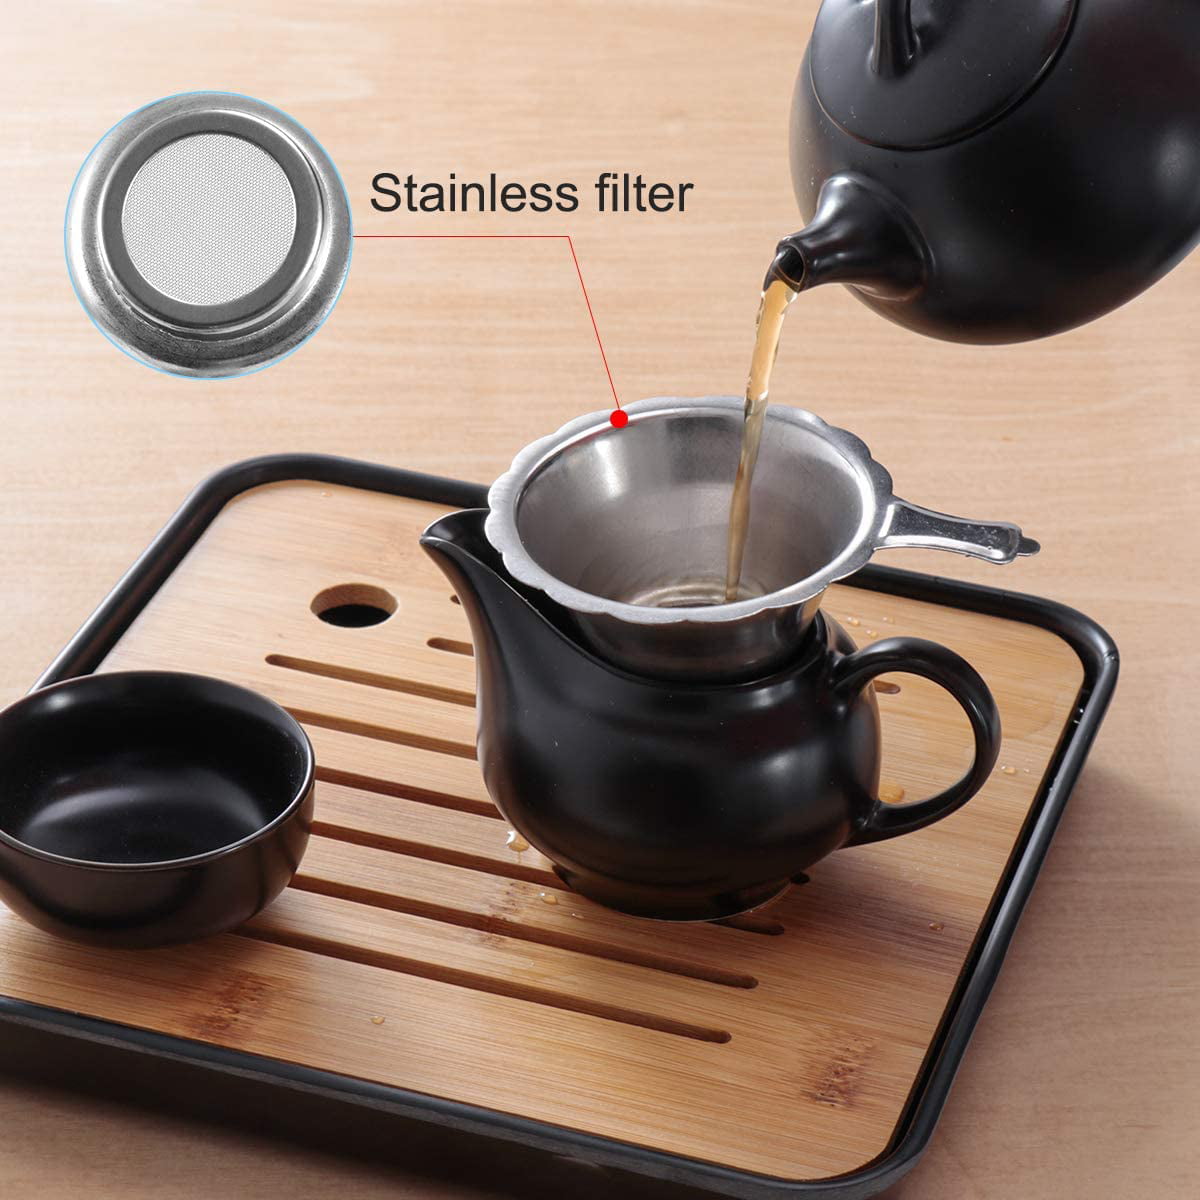 Lyty Chinese Tea Pot Cup Set with Tray Infuser Travel Ceramic Tea set Porcelain Teapot Portable All in One Gift Bag for Outdoor Picnic Business Hotel 